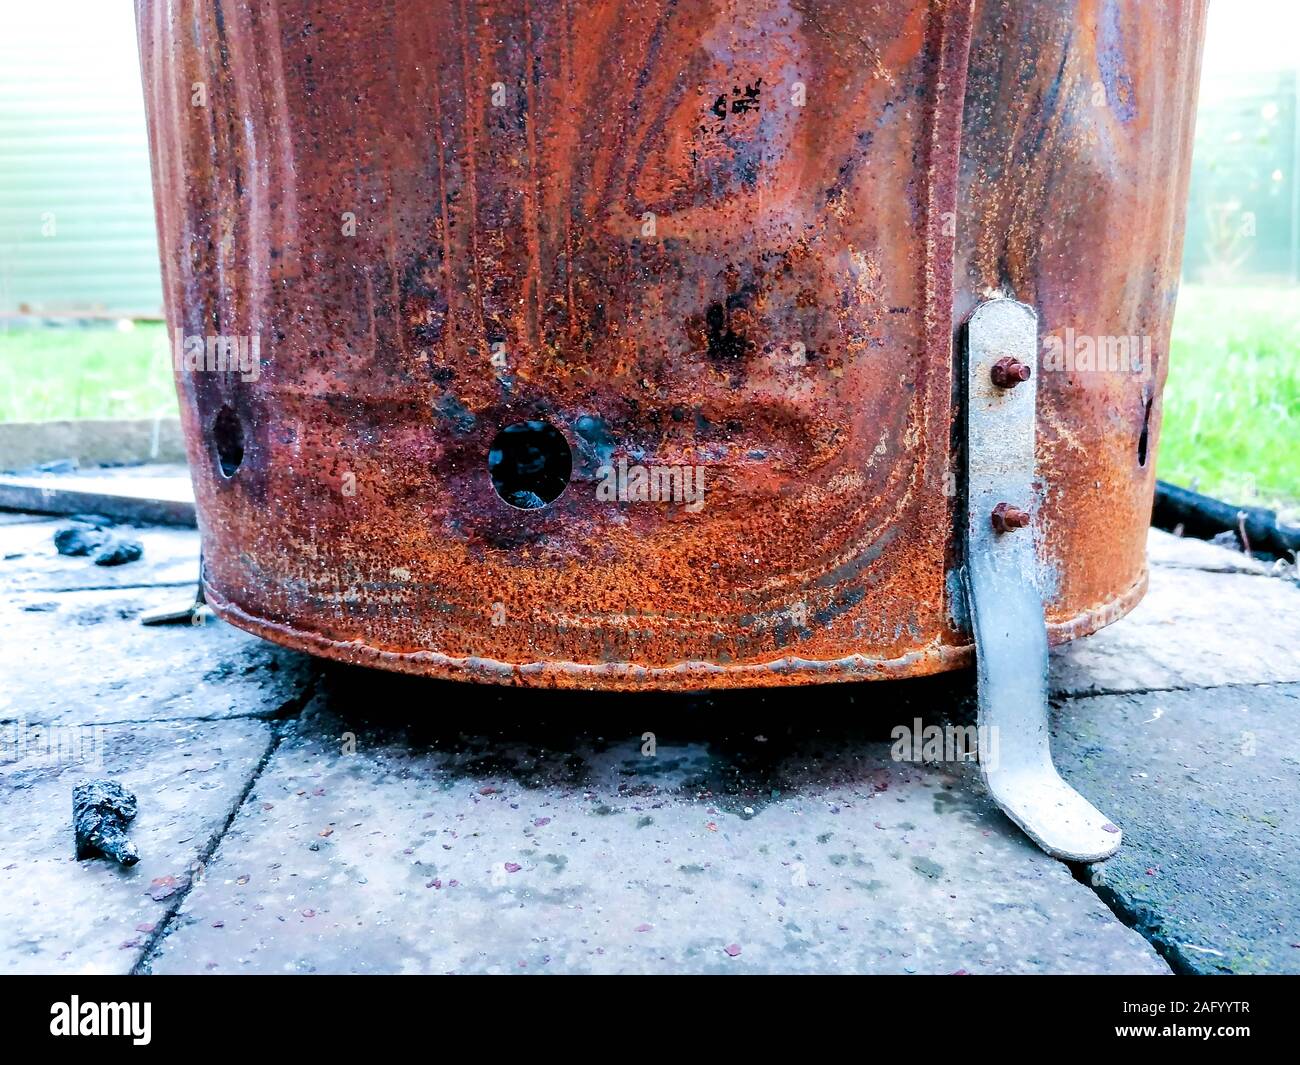 https://c8.alamy.com/comp/2AFYYTR/a-burn-bin-that-has-been-used-to-burn-wood-paper-and-other-combustible-materials-2AFYYTR.jpg